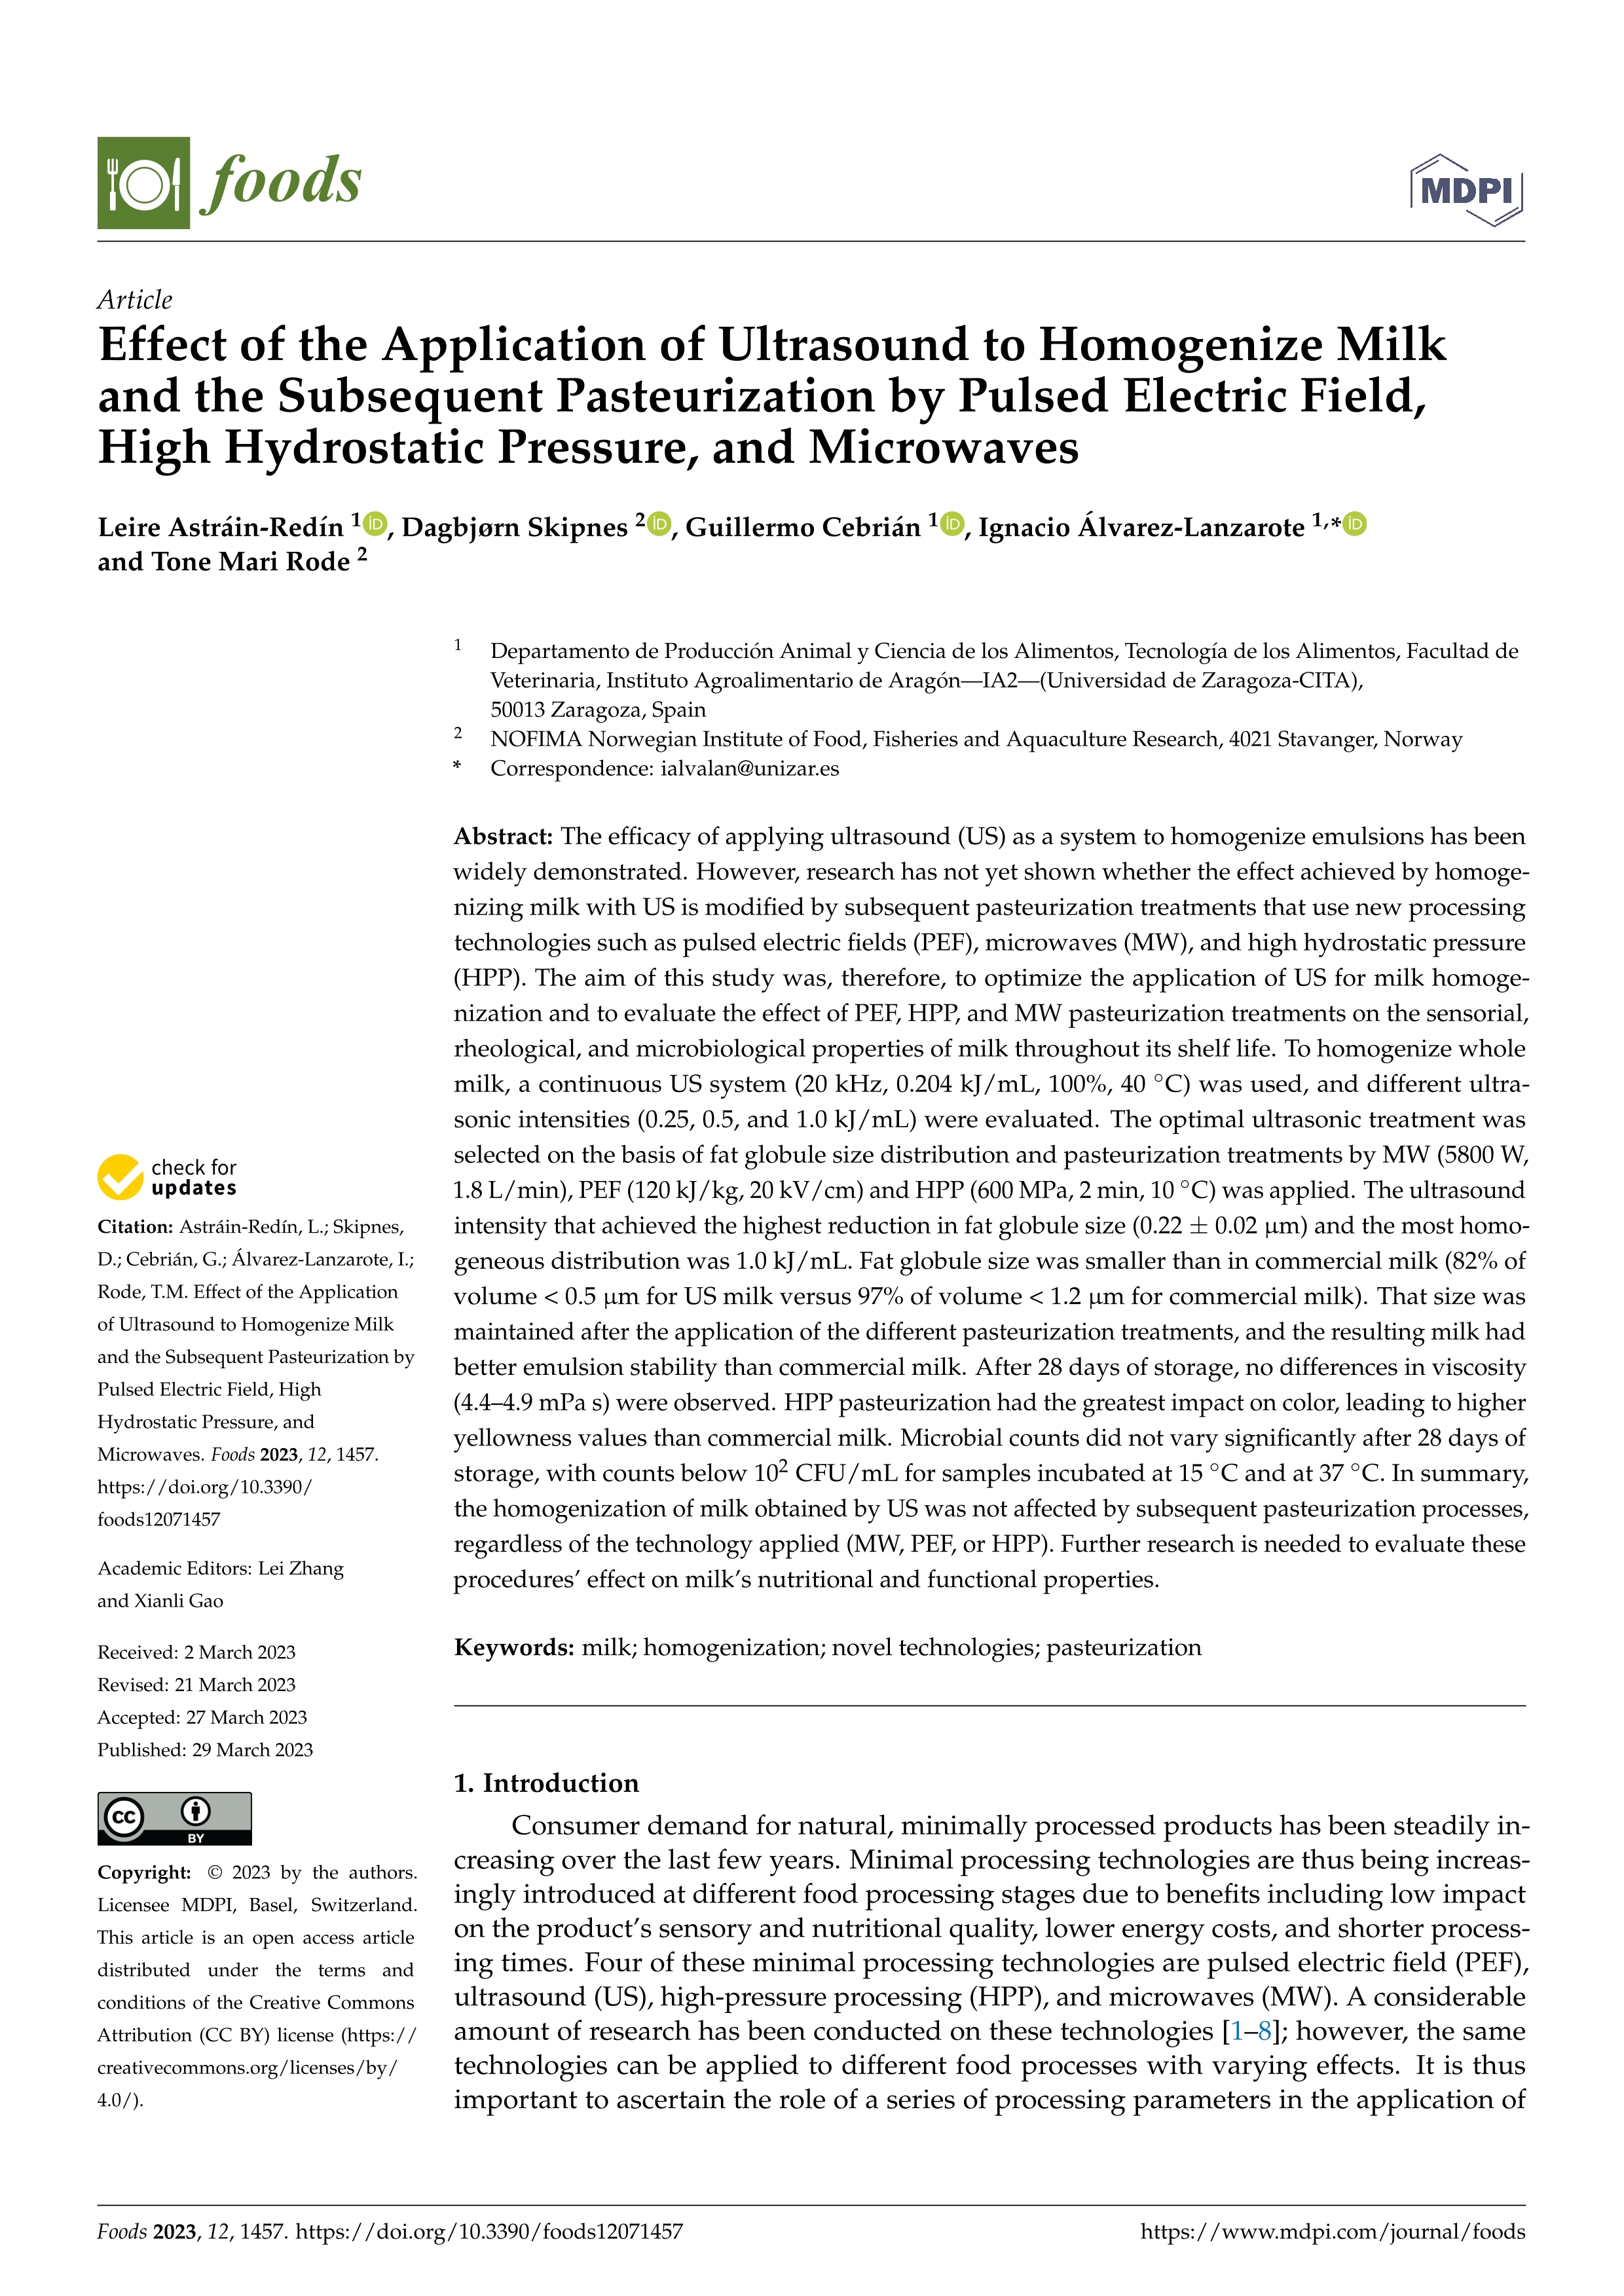 Effect of the application of ultrasound to homogenize milk and the subsequent pasteurization by pulsed electric field, high hydrostatic pressure, and microwaves